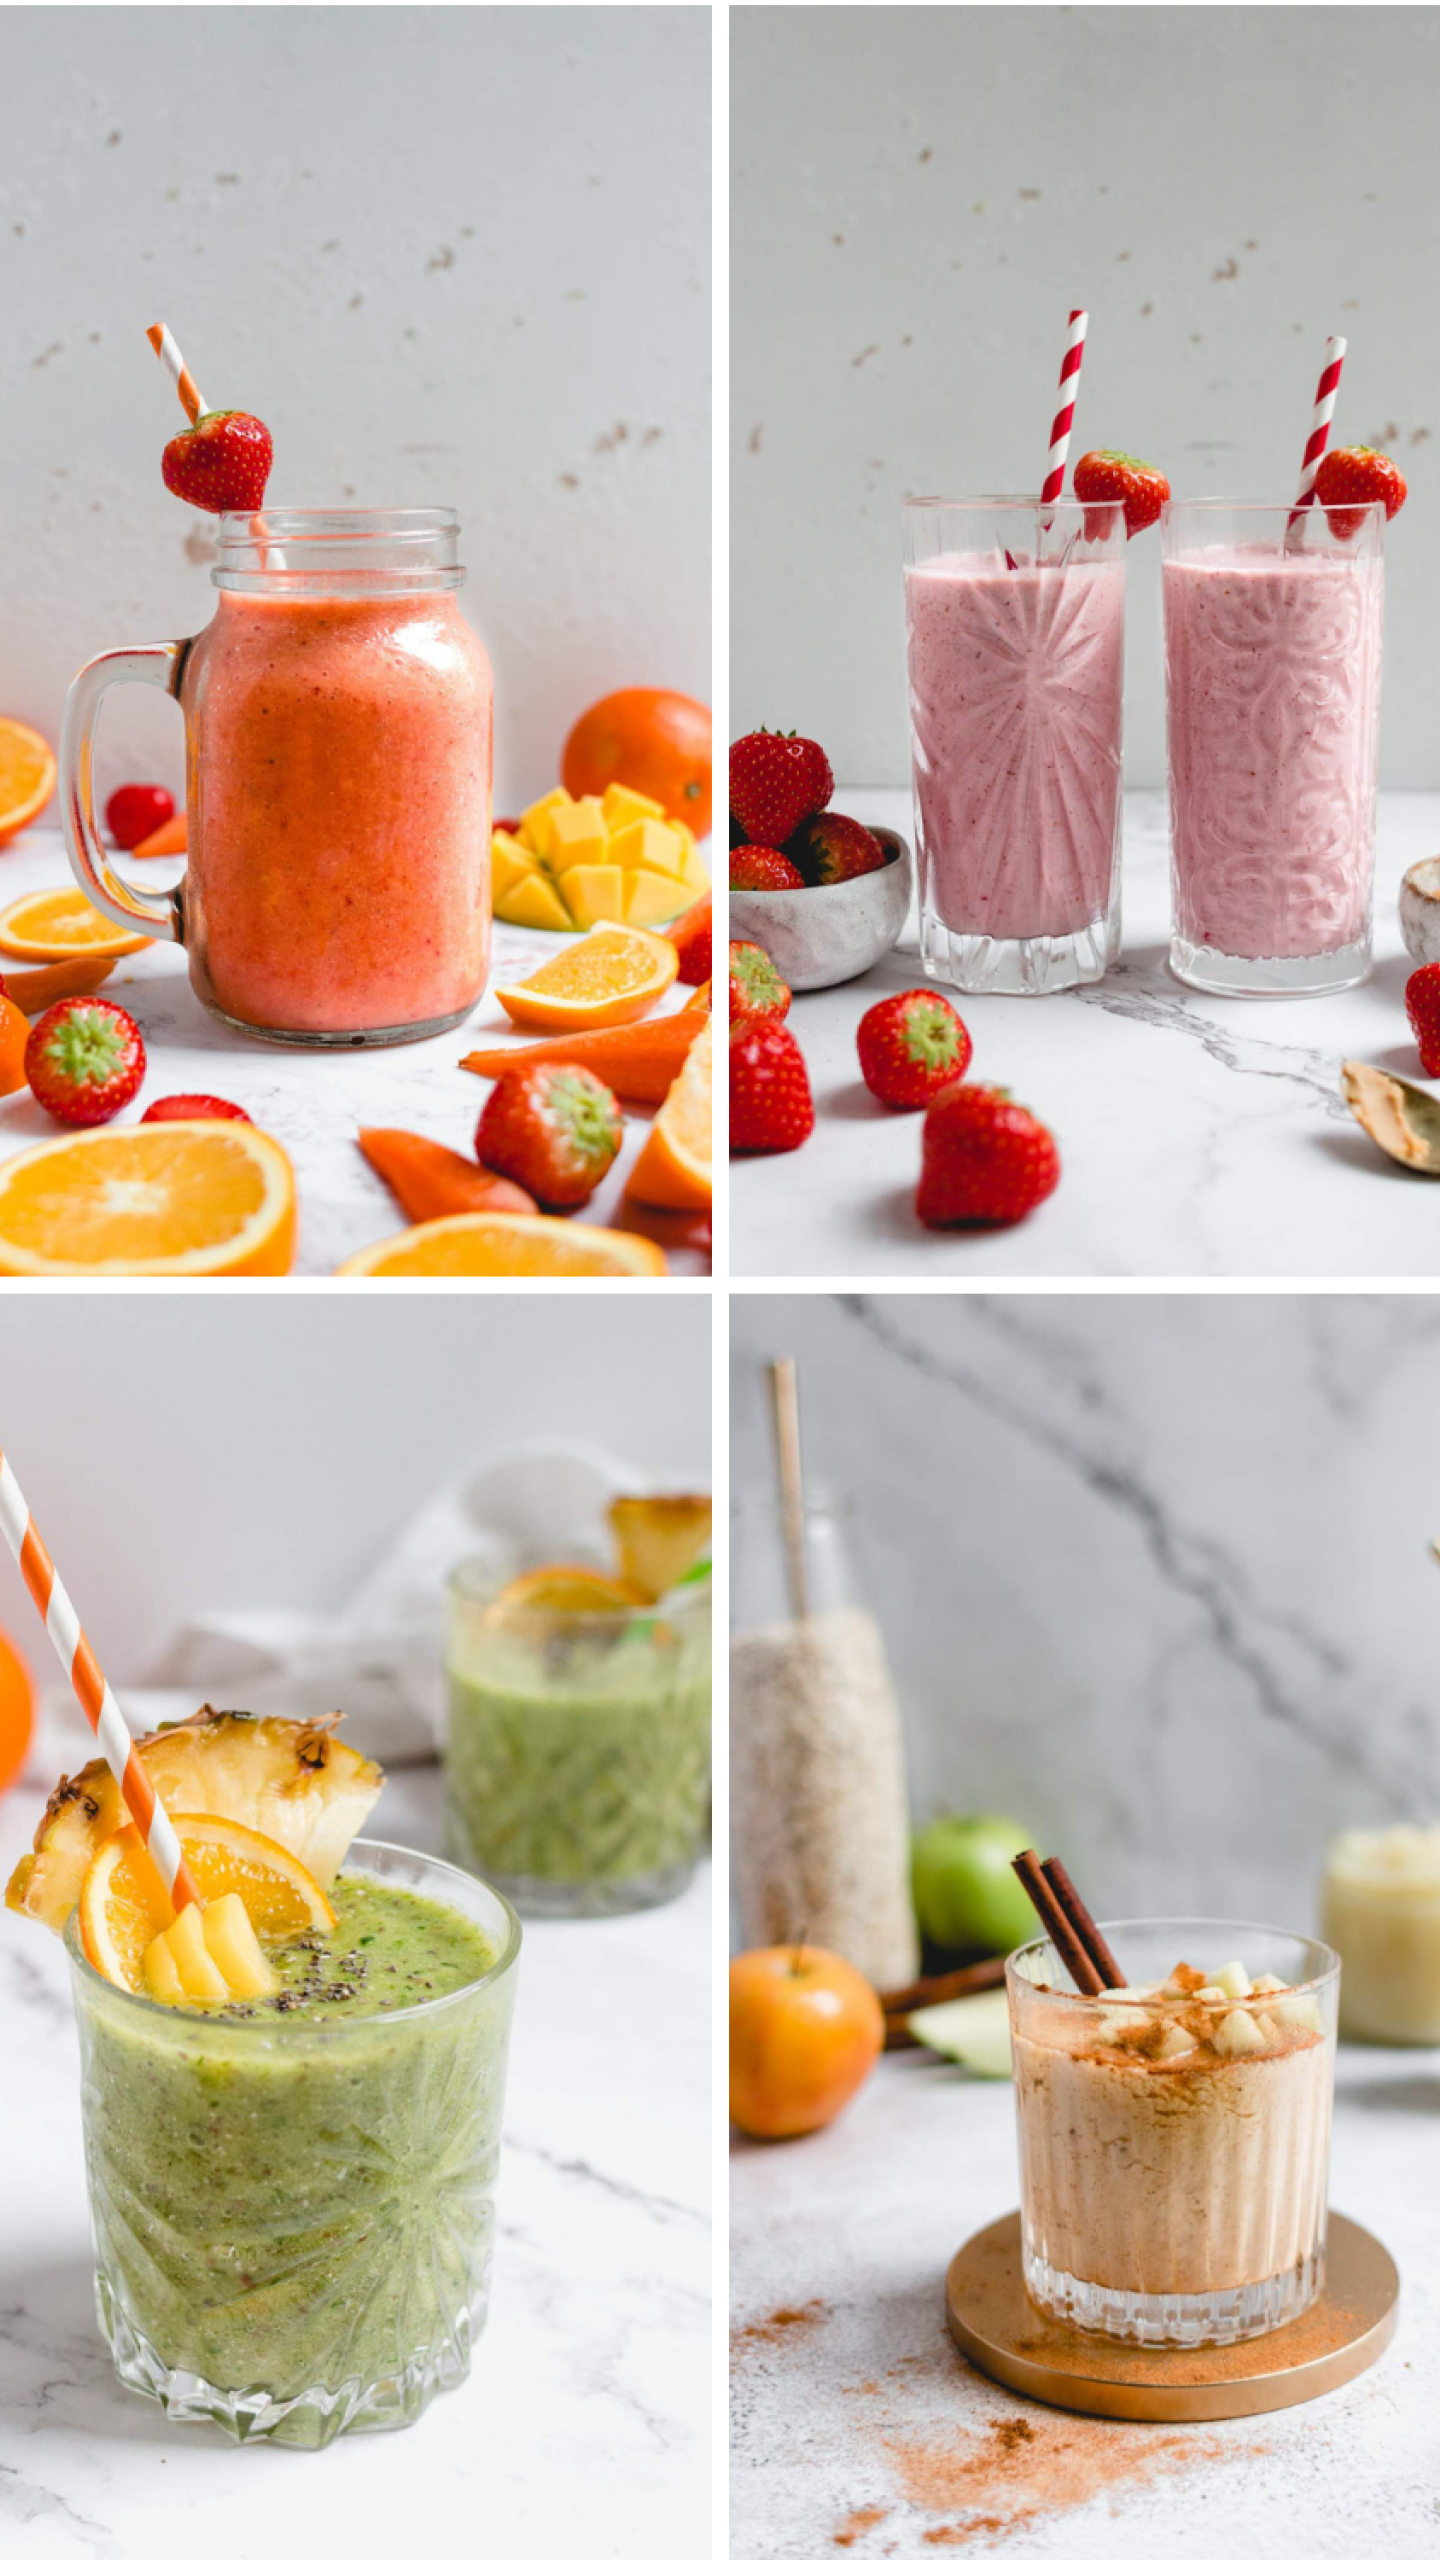 https://www.slenderkitchen.com/sites/default/files/styles/gws_1440/public/how-to-make-smoothies-4_0.png